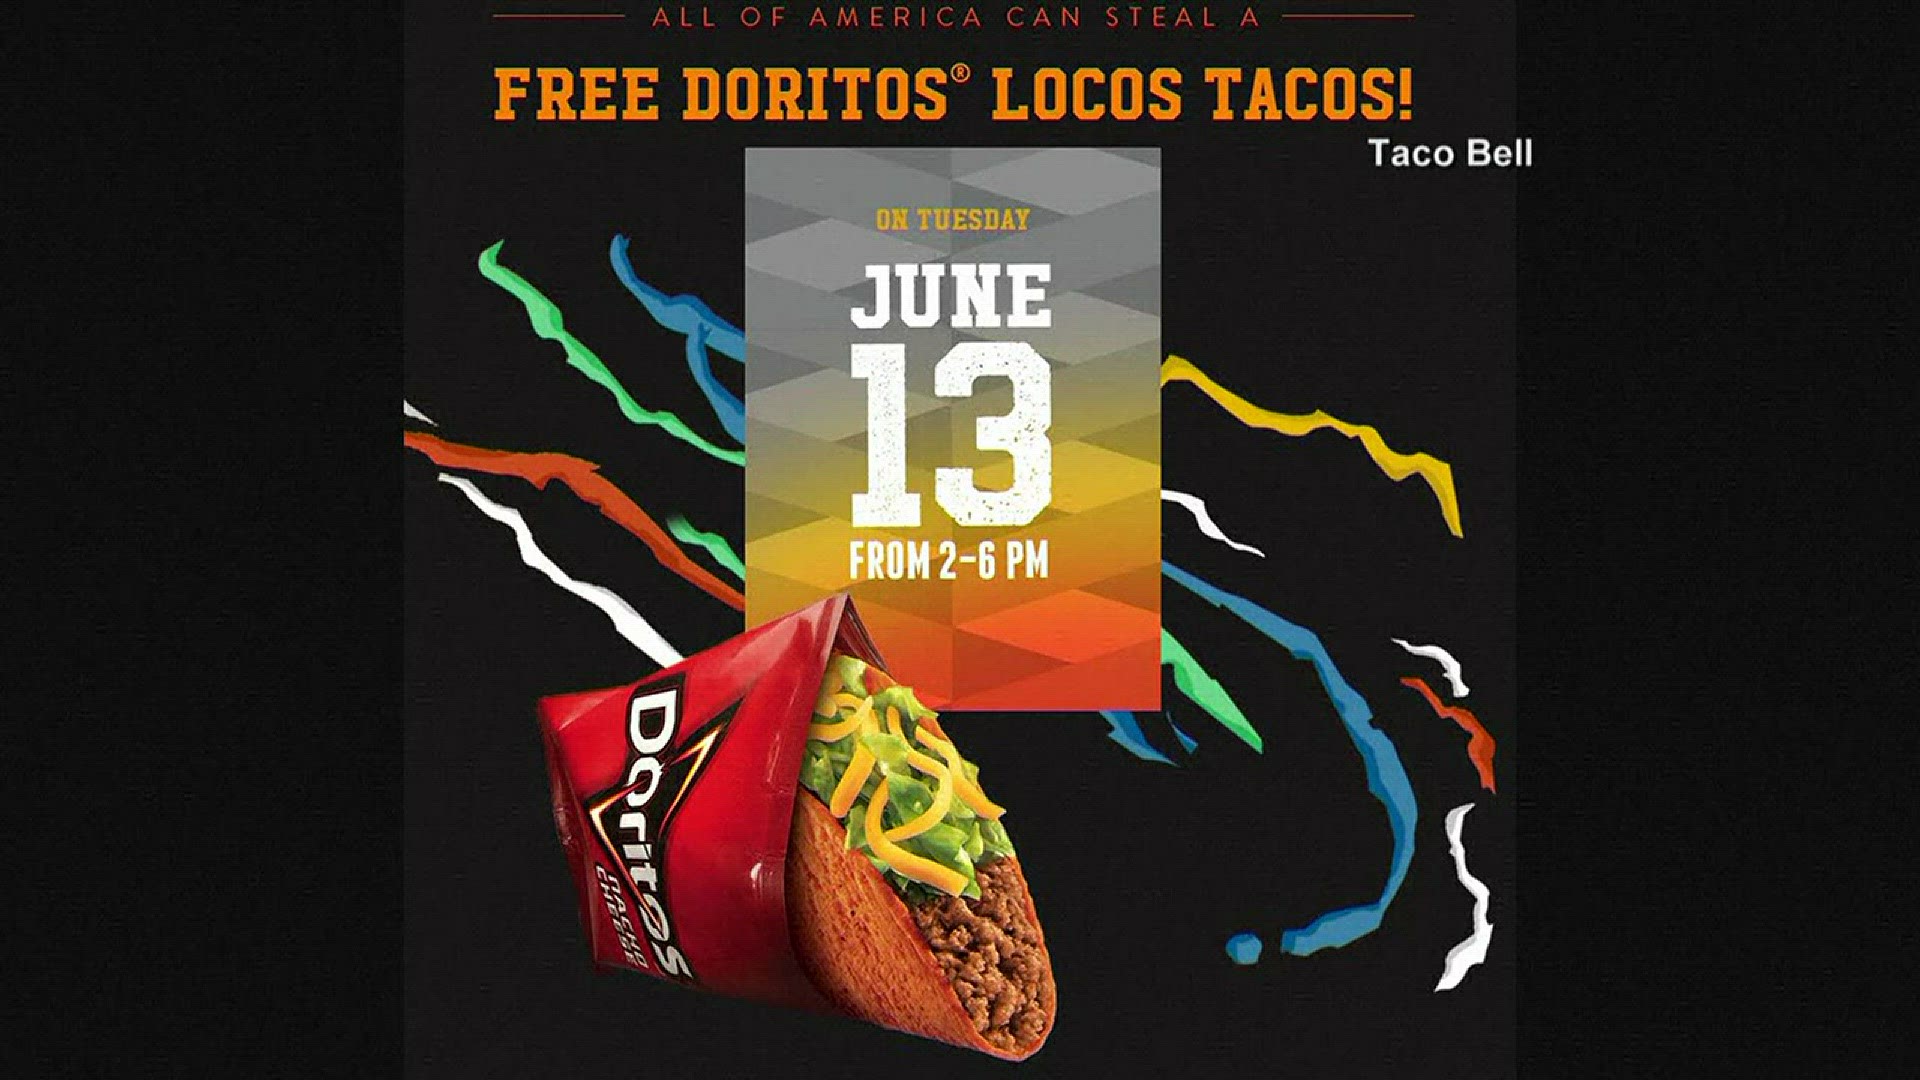 You can get one free Doritos Locos Taco at Taco Bell until 6 p.m. tonight.